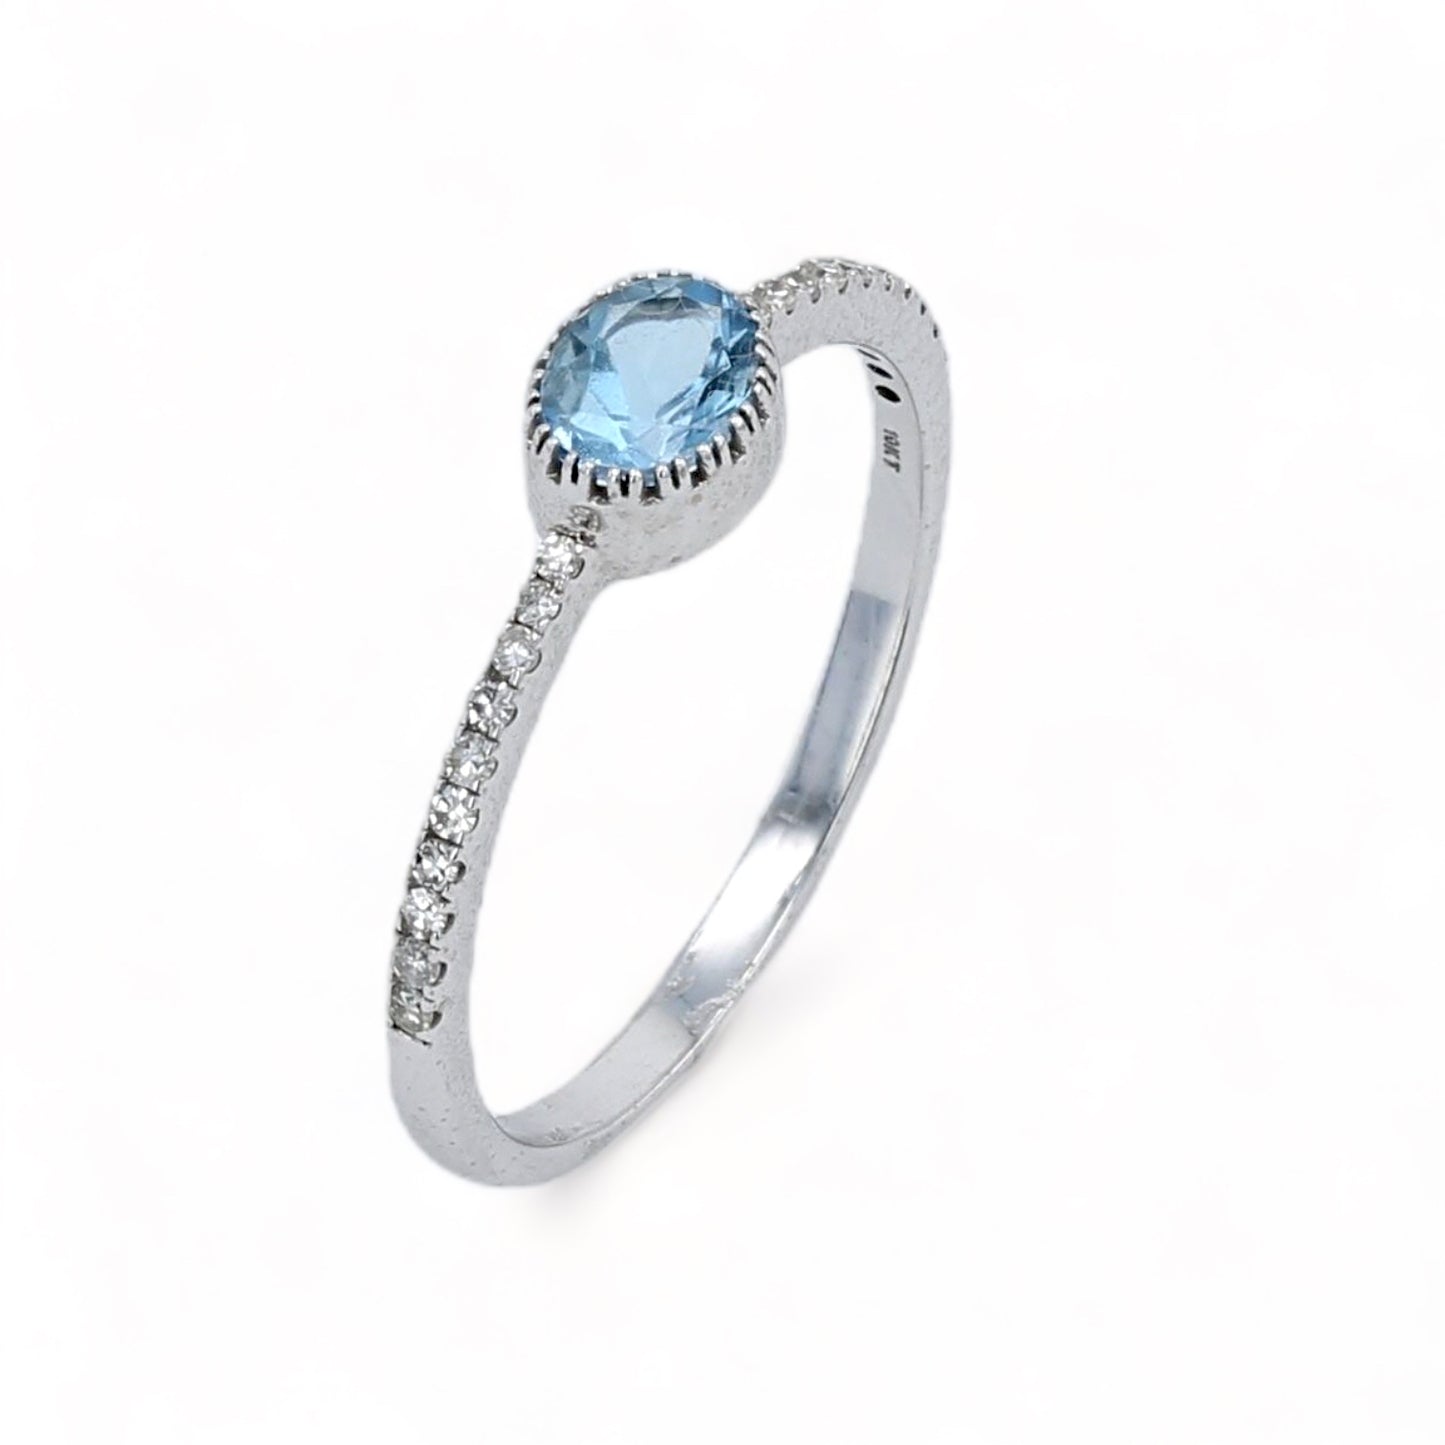 10K white gold oval natural aquamarine with diamonds ring-31911